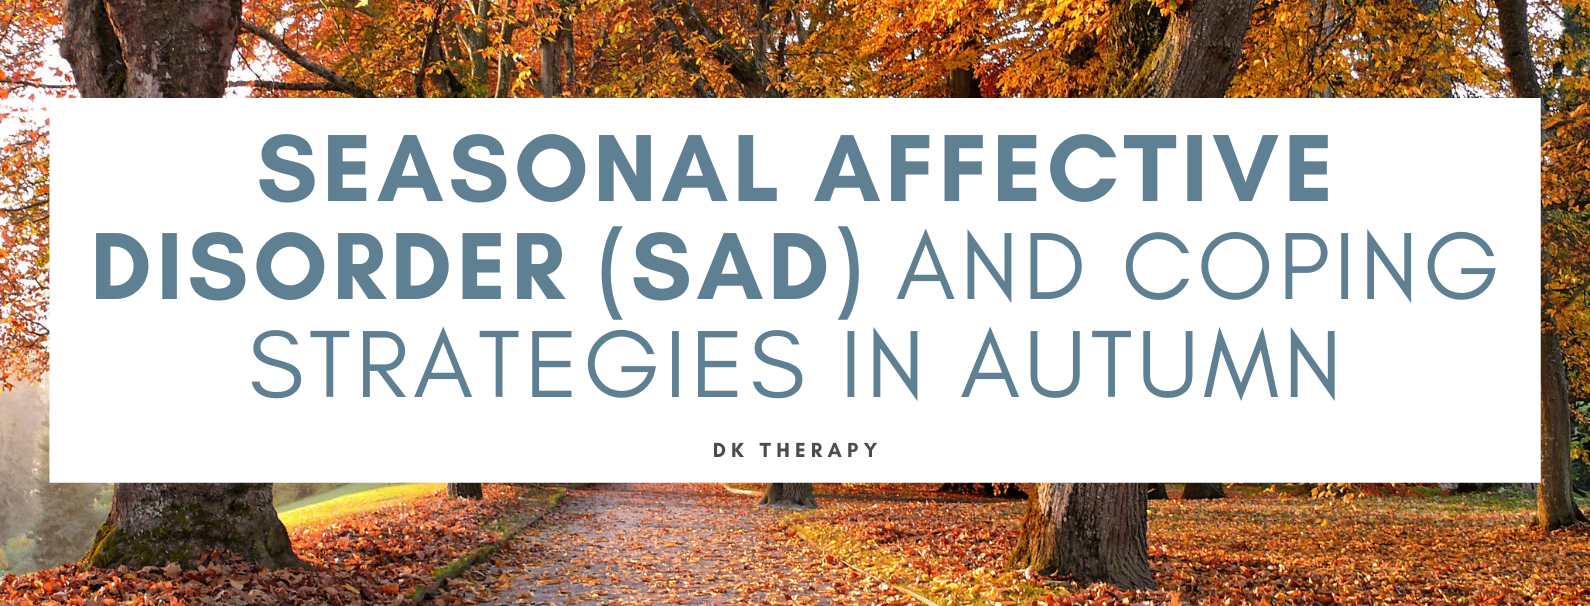 Seasonal Affective Disorder (SAD) and Coping Strategies in Autumn